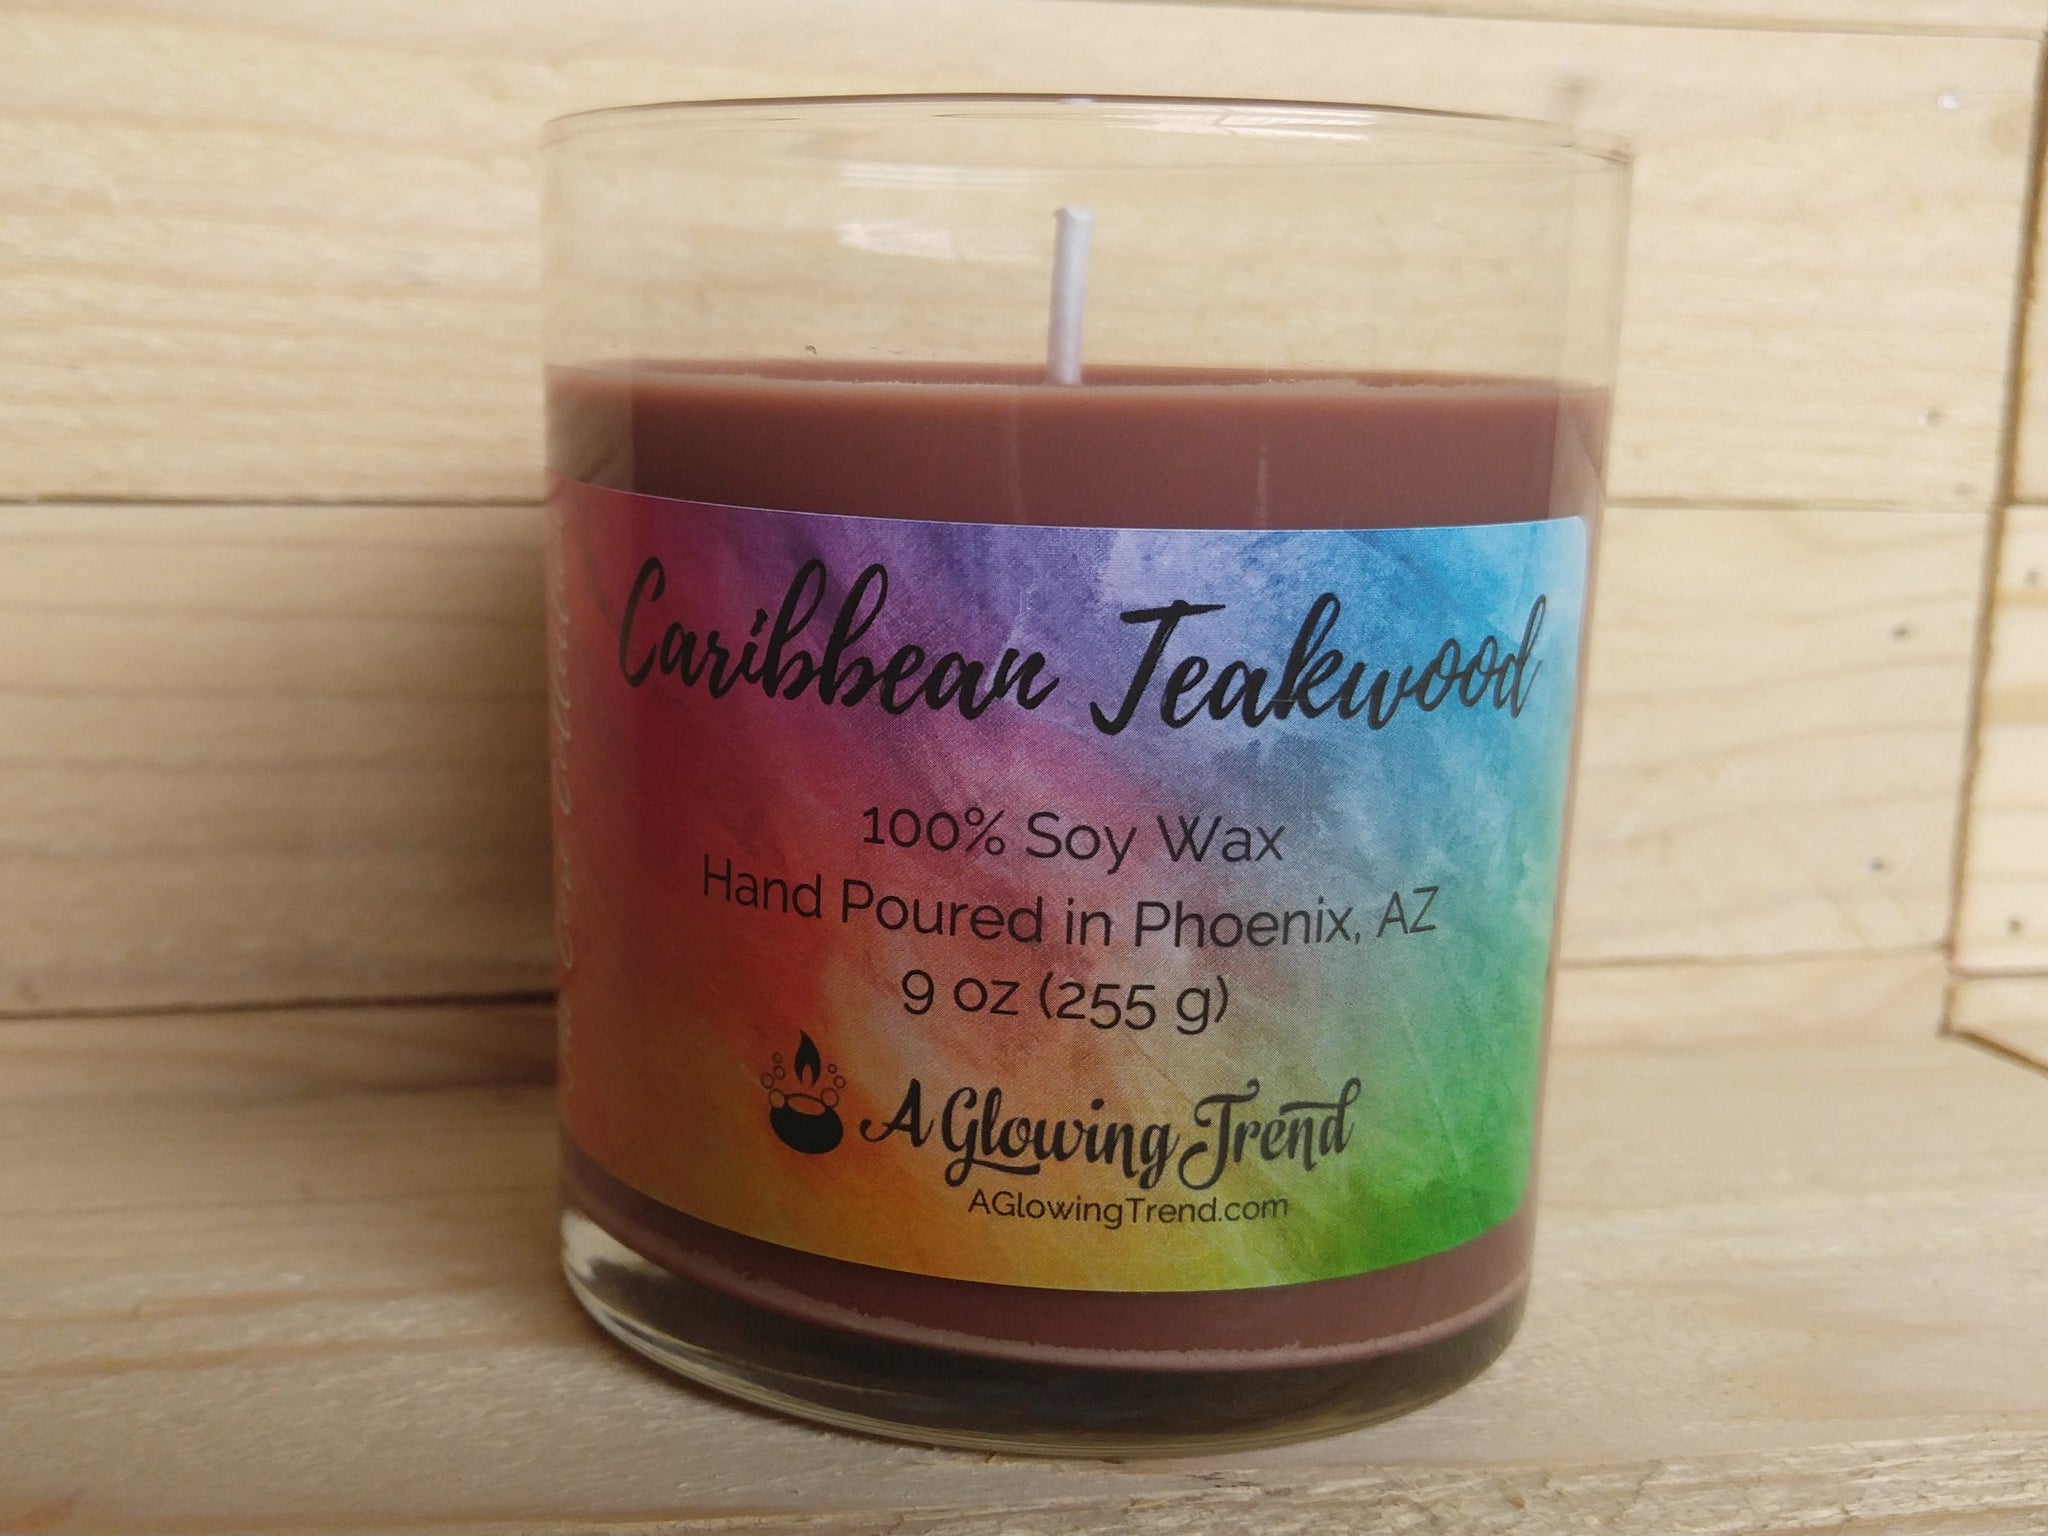 A 9 oz glass tumbler containing a brown Caribbean Teakwood scented soy candle by A Glowing Trend